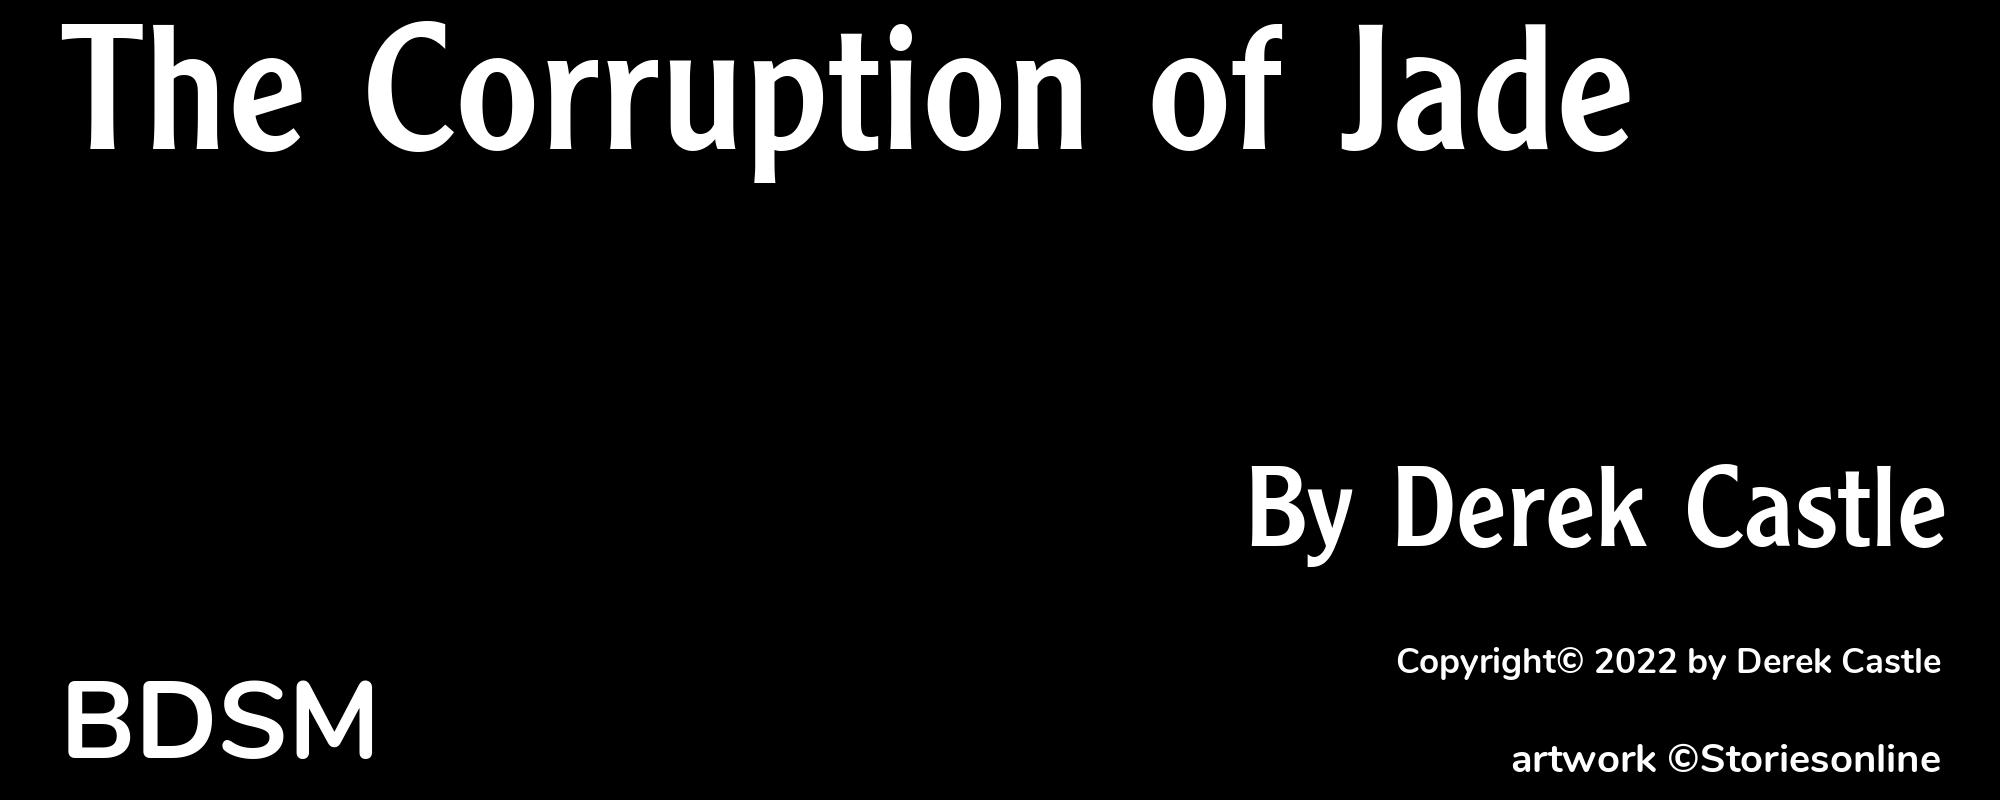 The Corruption of Jade - Cover